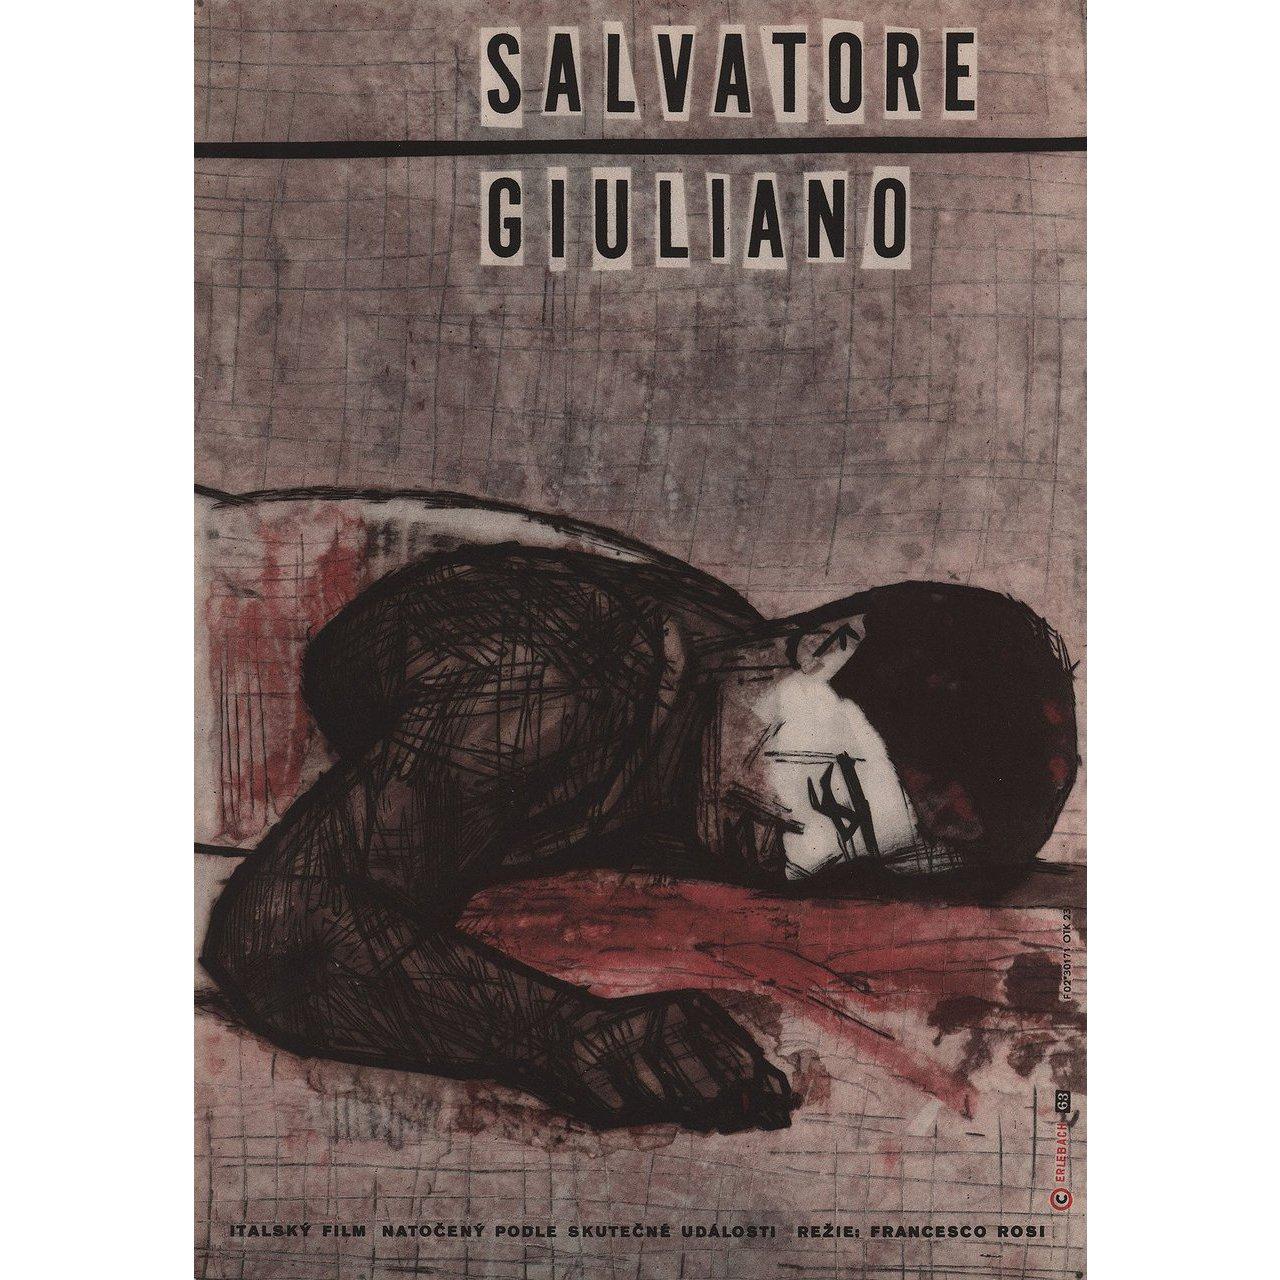 Original 1963 Czech A3 poster by Vladimir Erlebach for the film Salvatore Giuliano directed by Francesco Rosi with Salvo Randone / Frank Wolff. Fine condition, rolled. Please note: the size is stated in inches and the actual size can vary by an inch